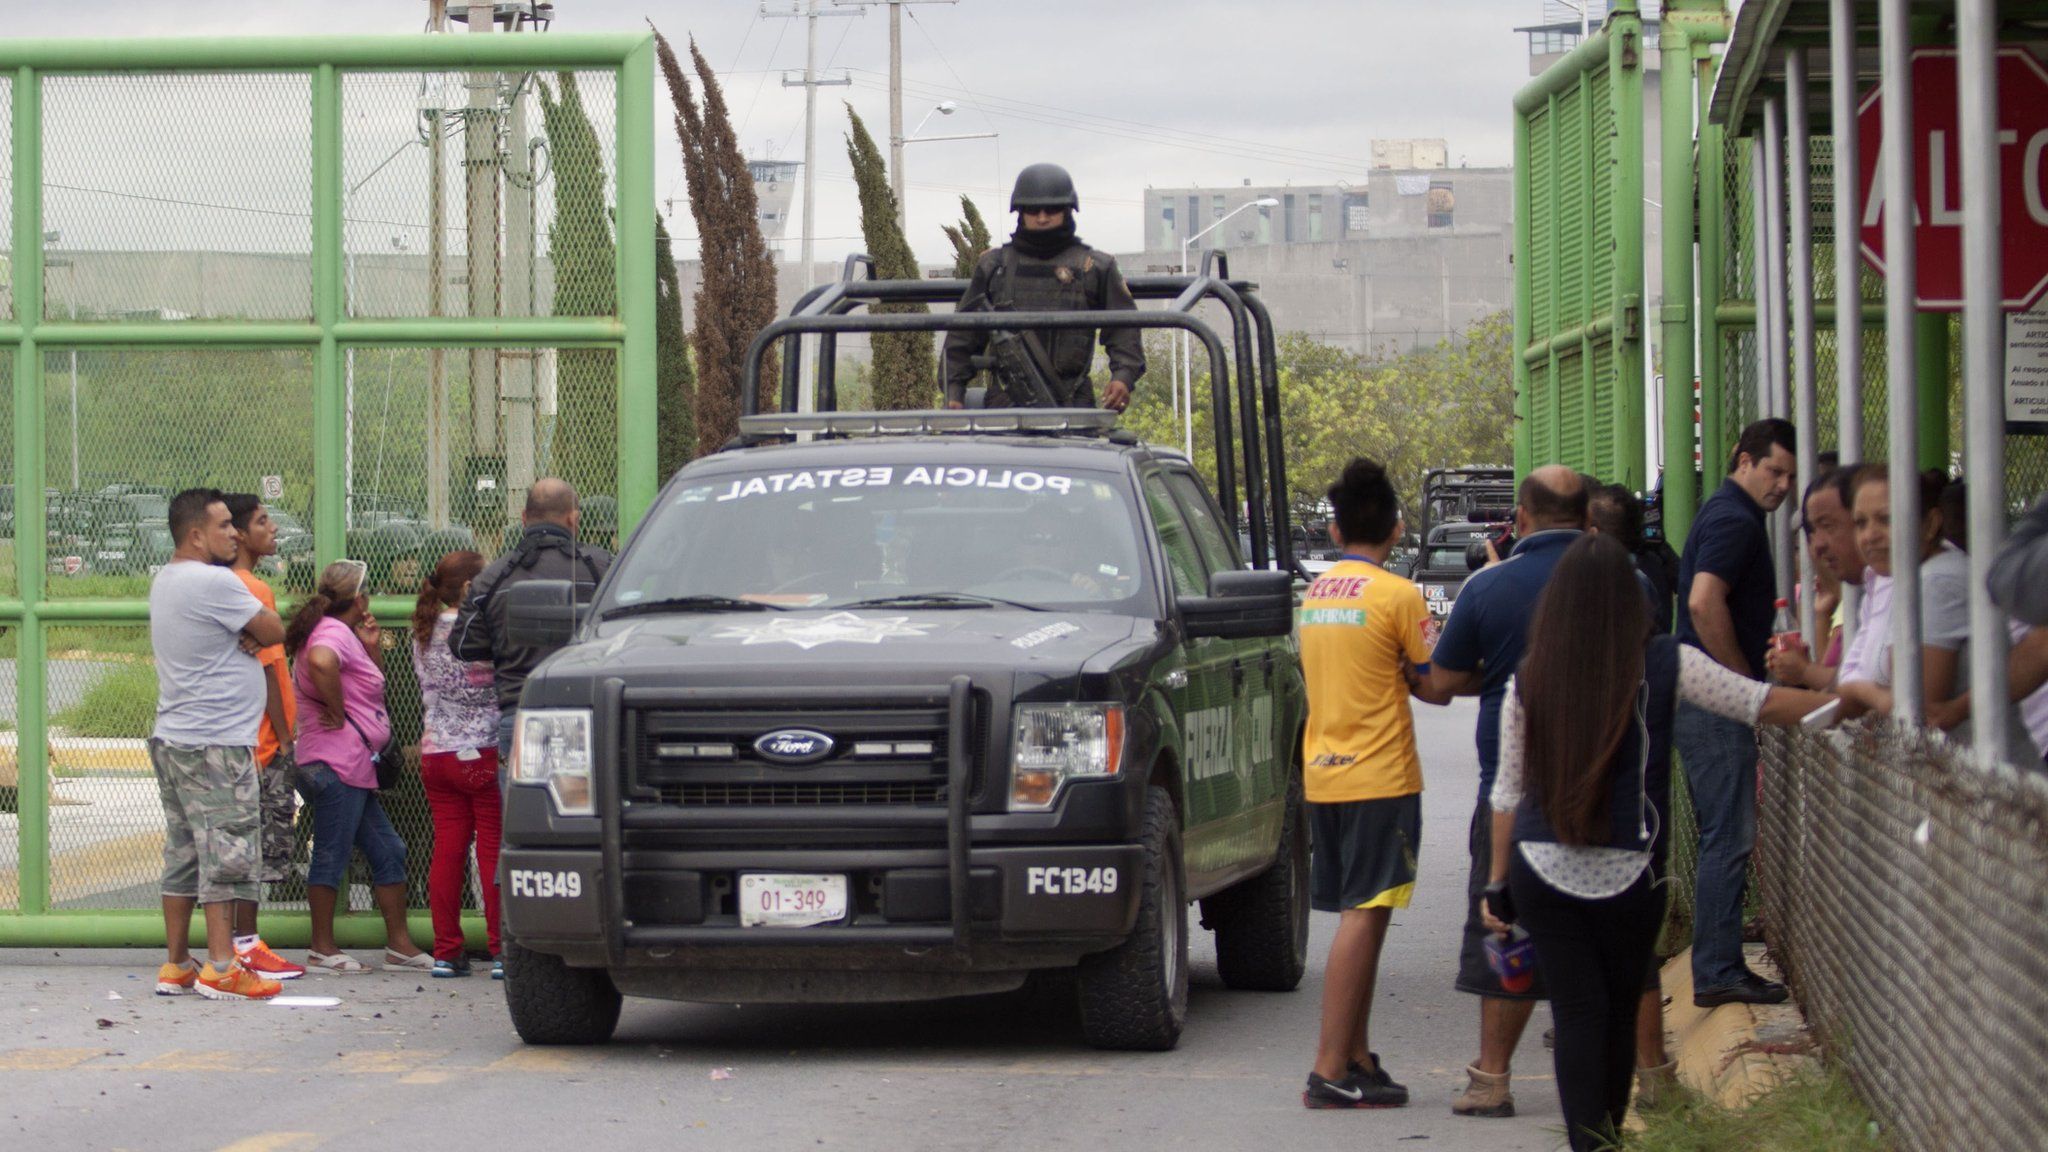 Armed police guard the main gate at Cadereyta prison in Mexico after a riot